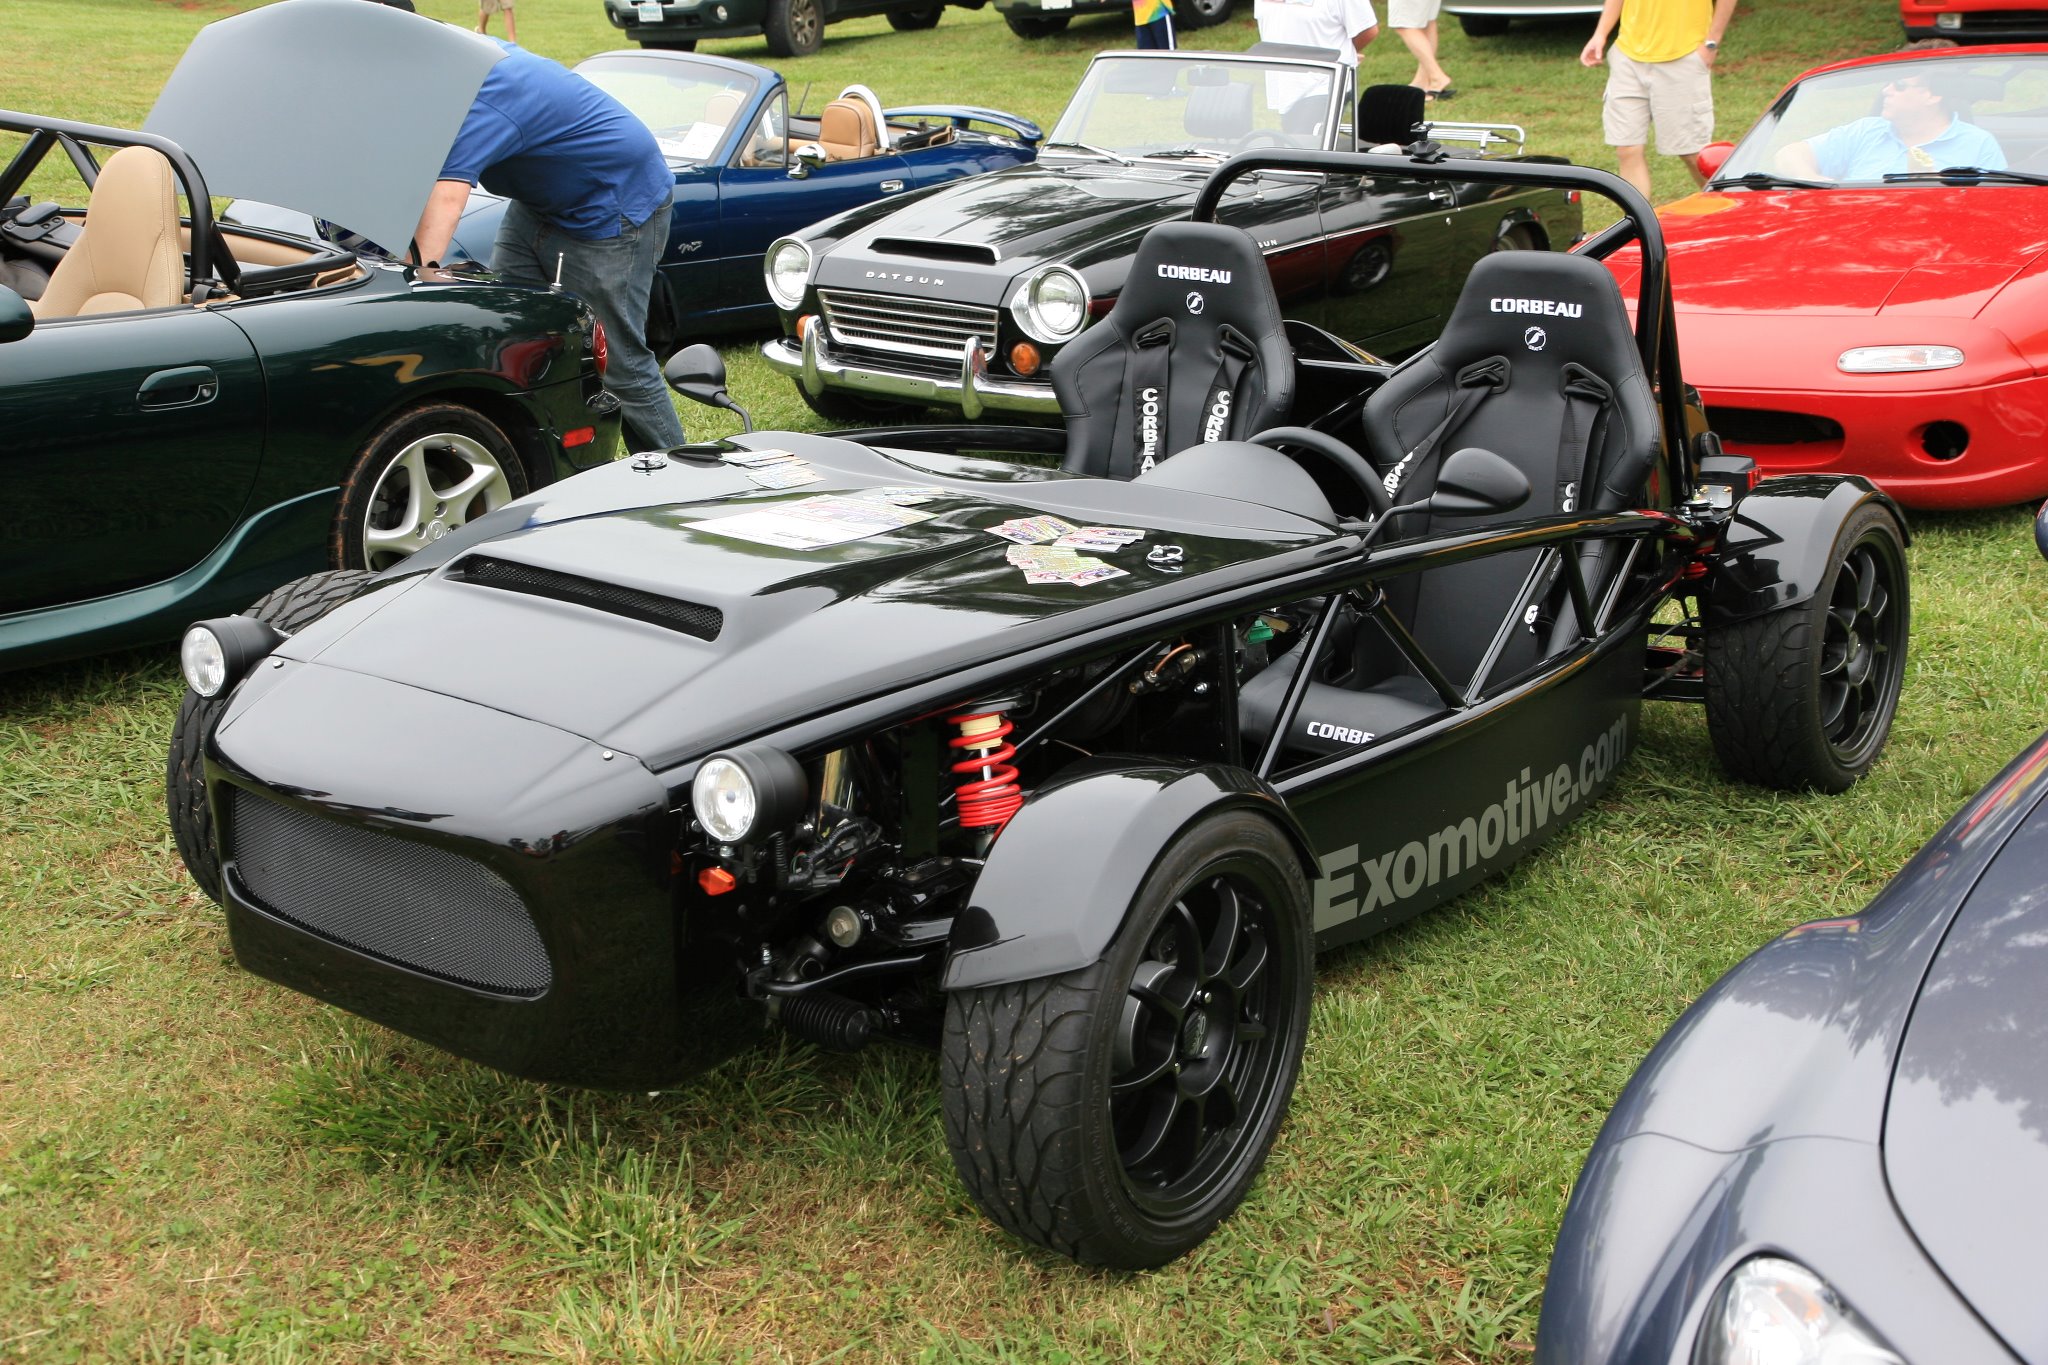 Exomotive at the Mitty